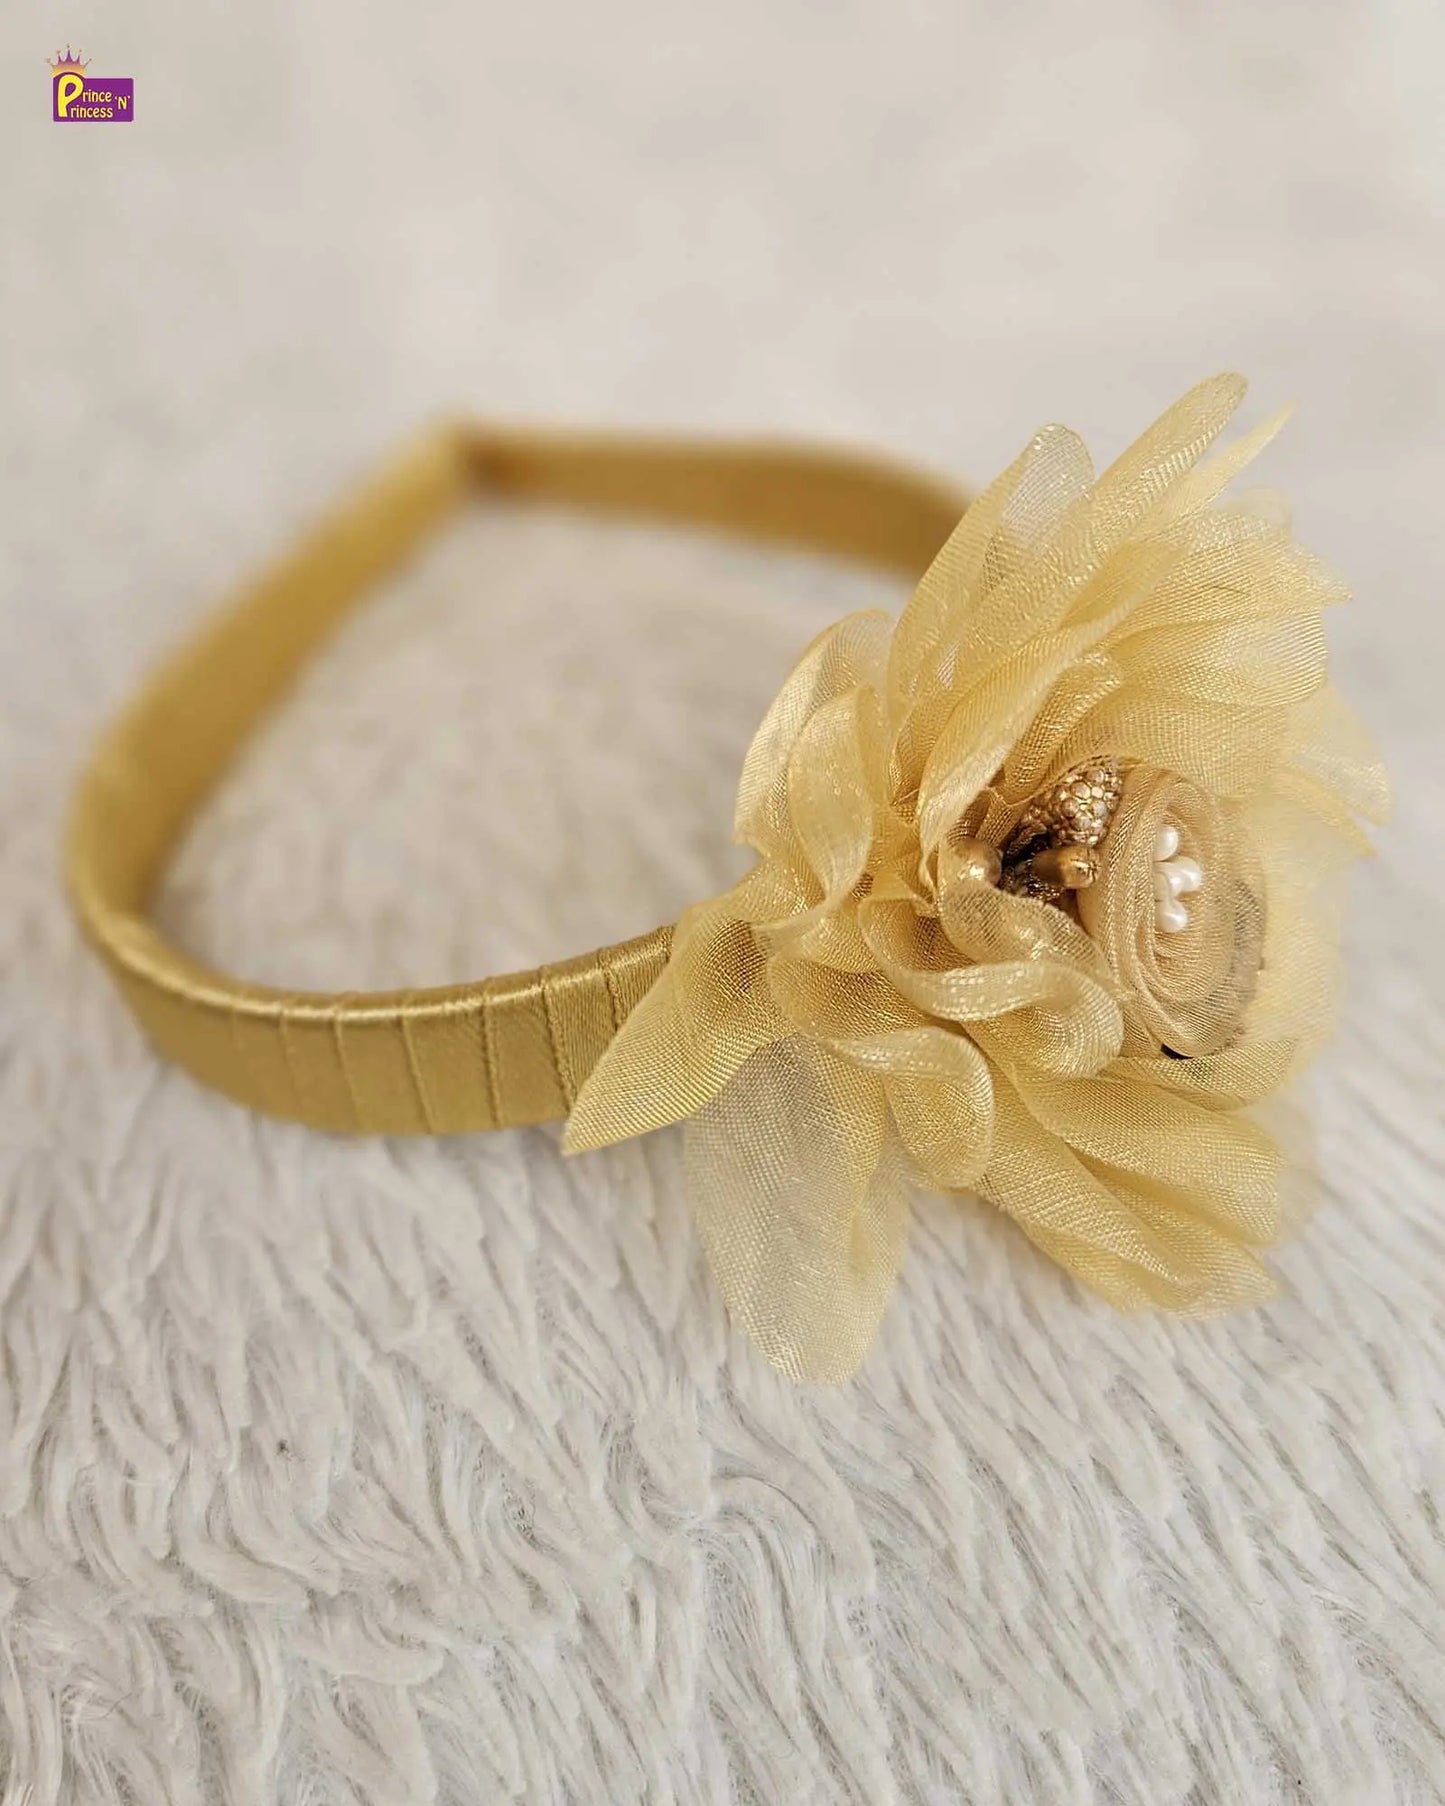 Golden Hair Accessories For Kids - Prince N Princess 